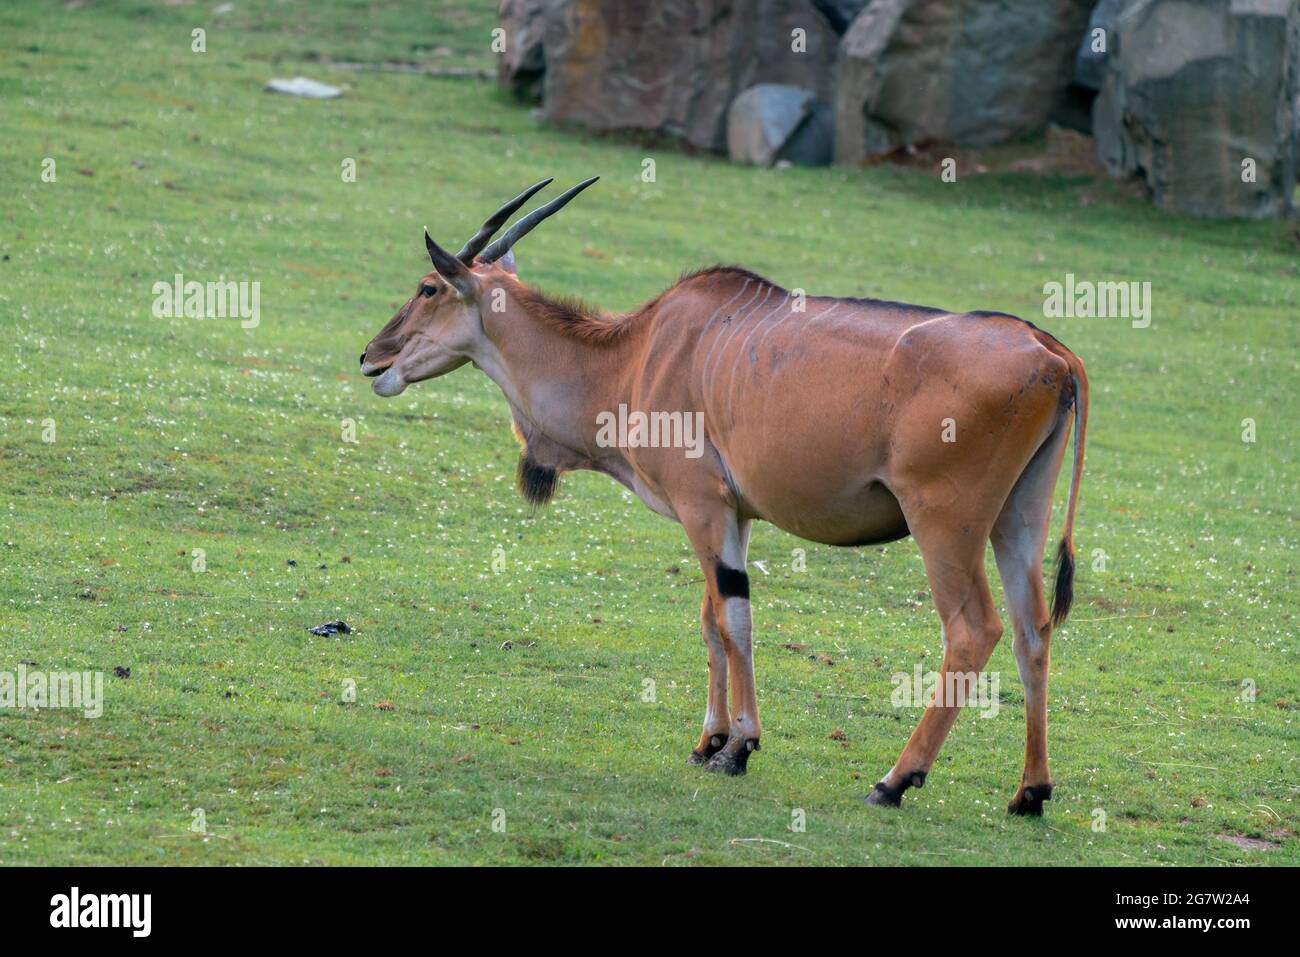 Detail shot of Common eland, Taurotragus oryx on a grassy ground. Savannah and plains antelope found in East and Southern Africa Stock Photo